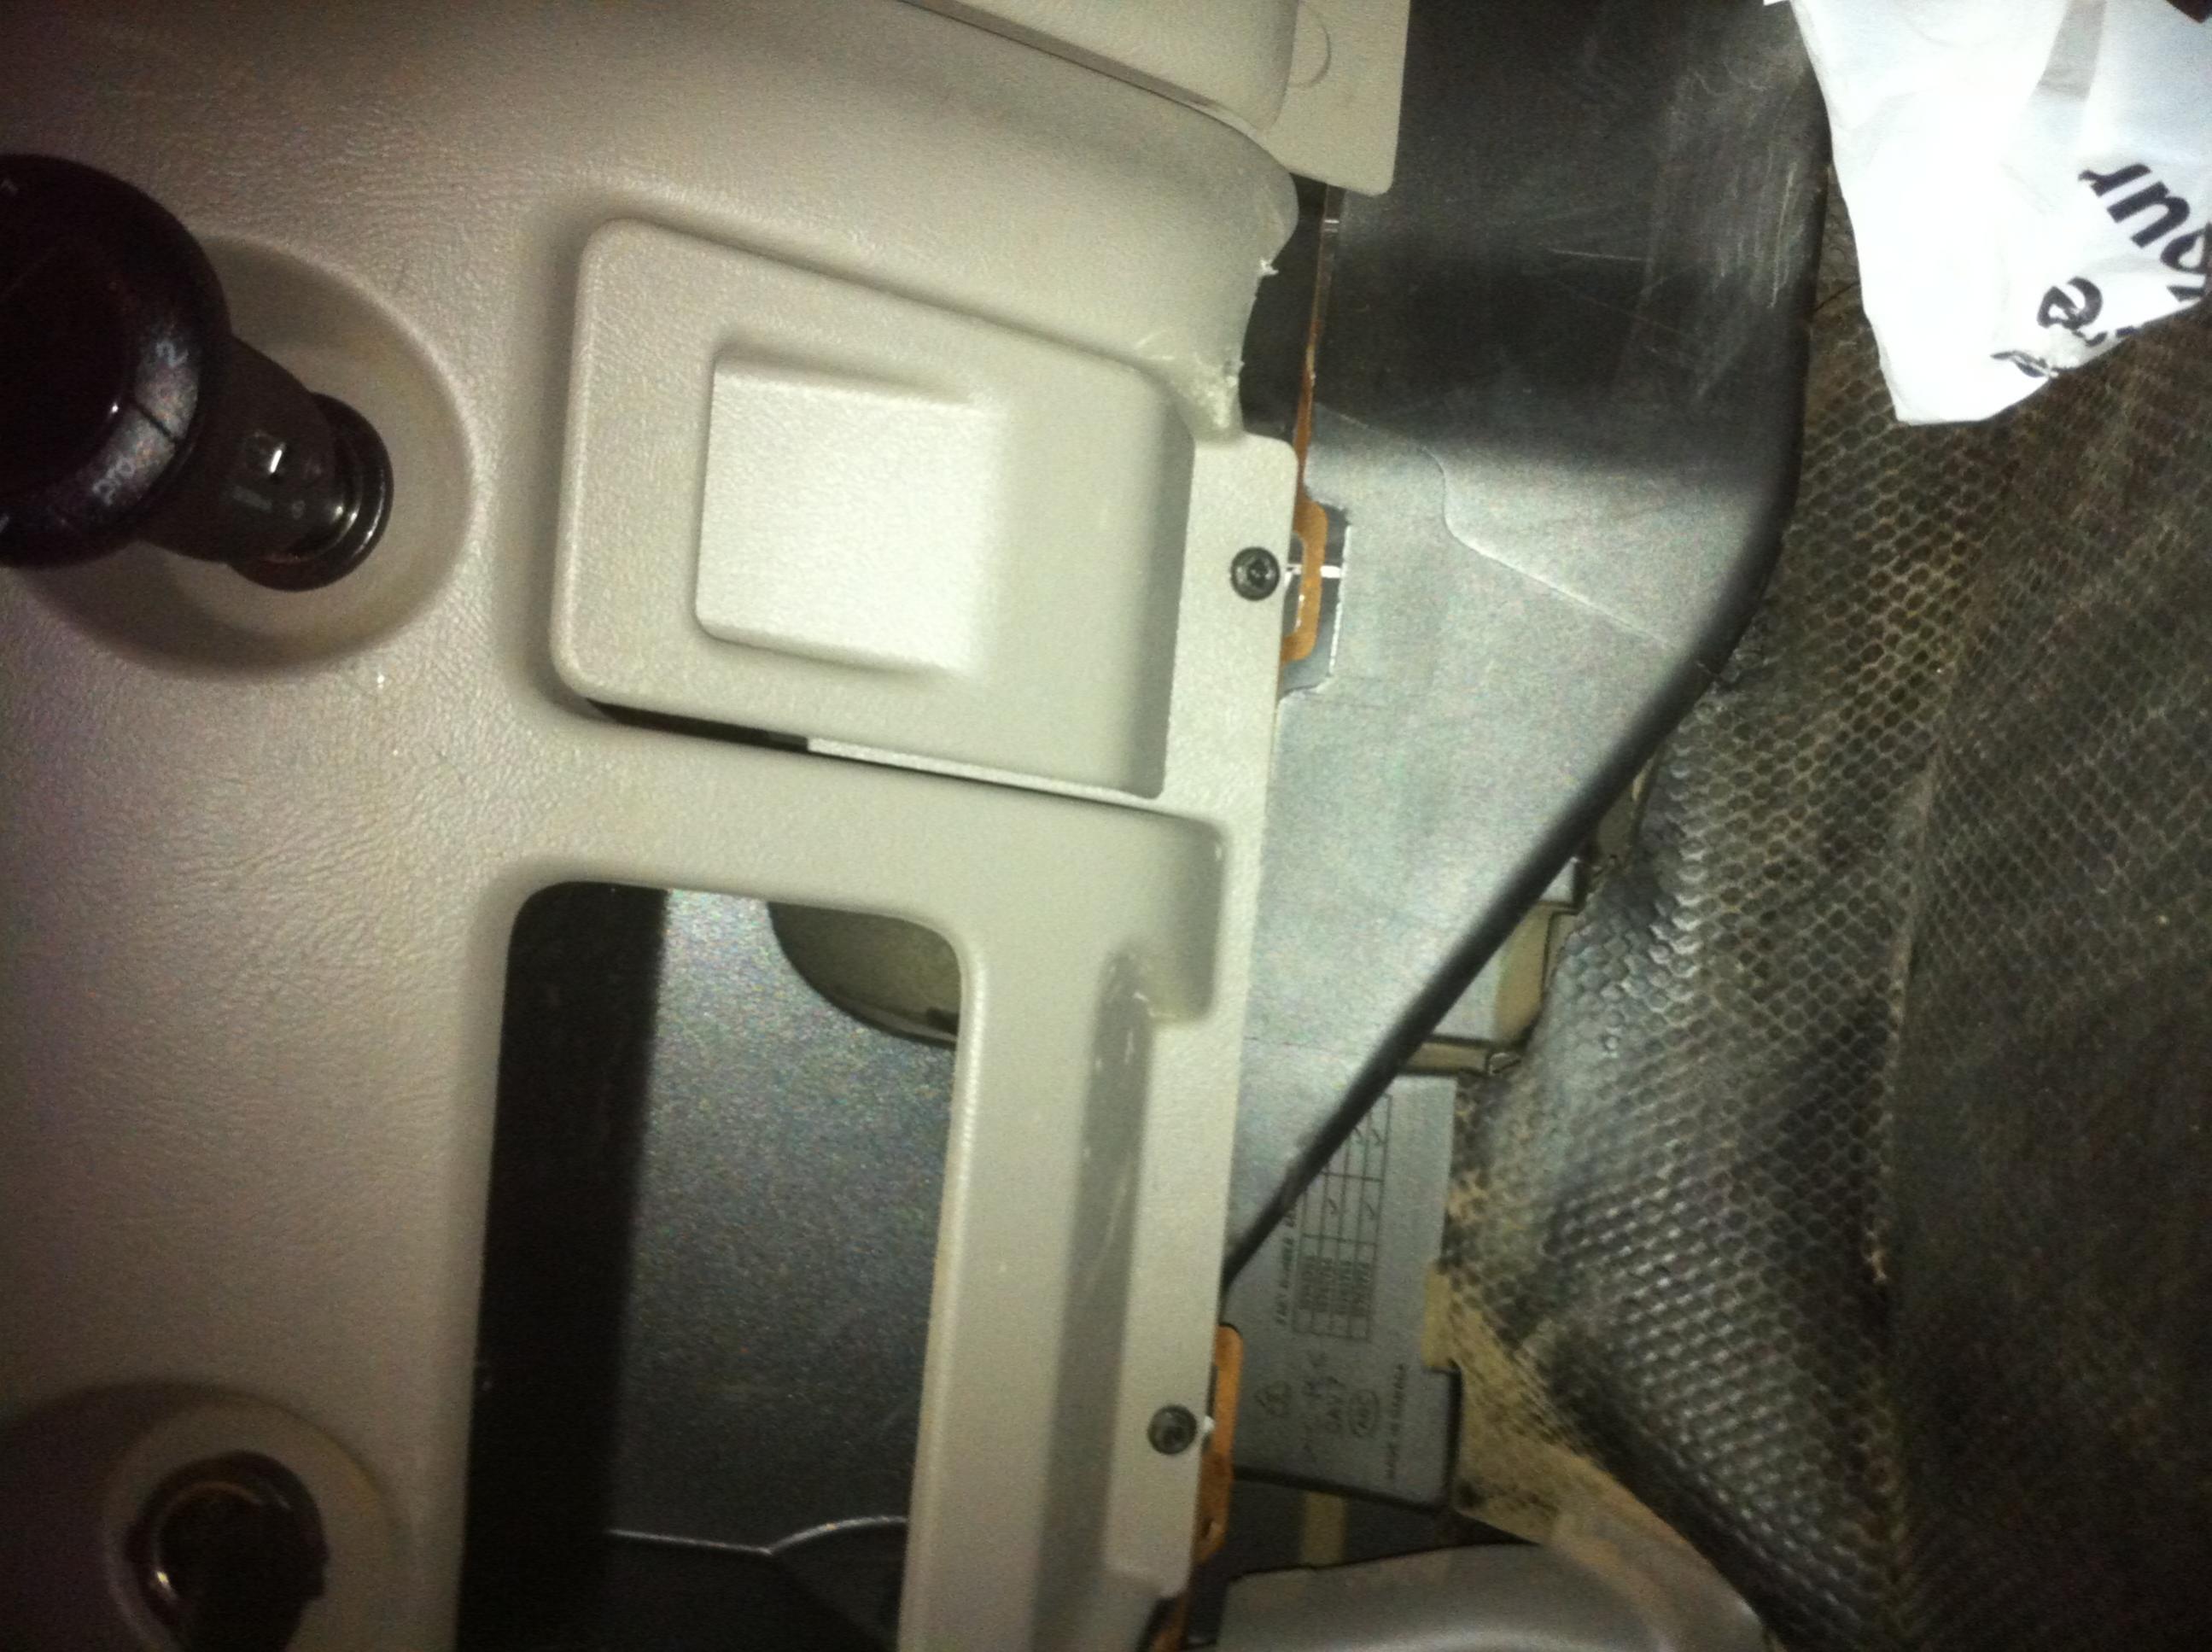 2006 Tahoe center console help - Chevrolet Forum - Chevy Enthusiasts Forums